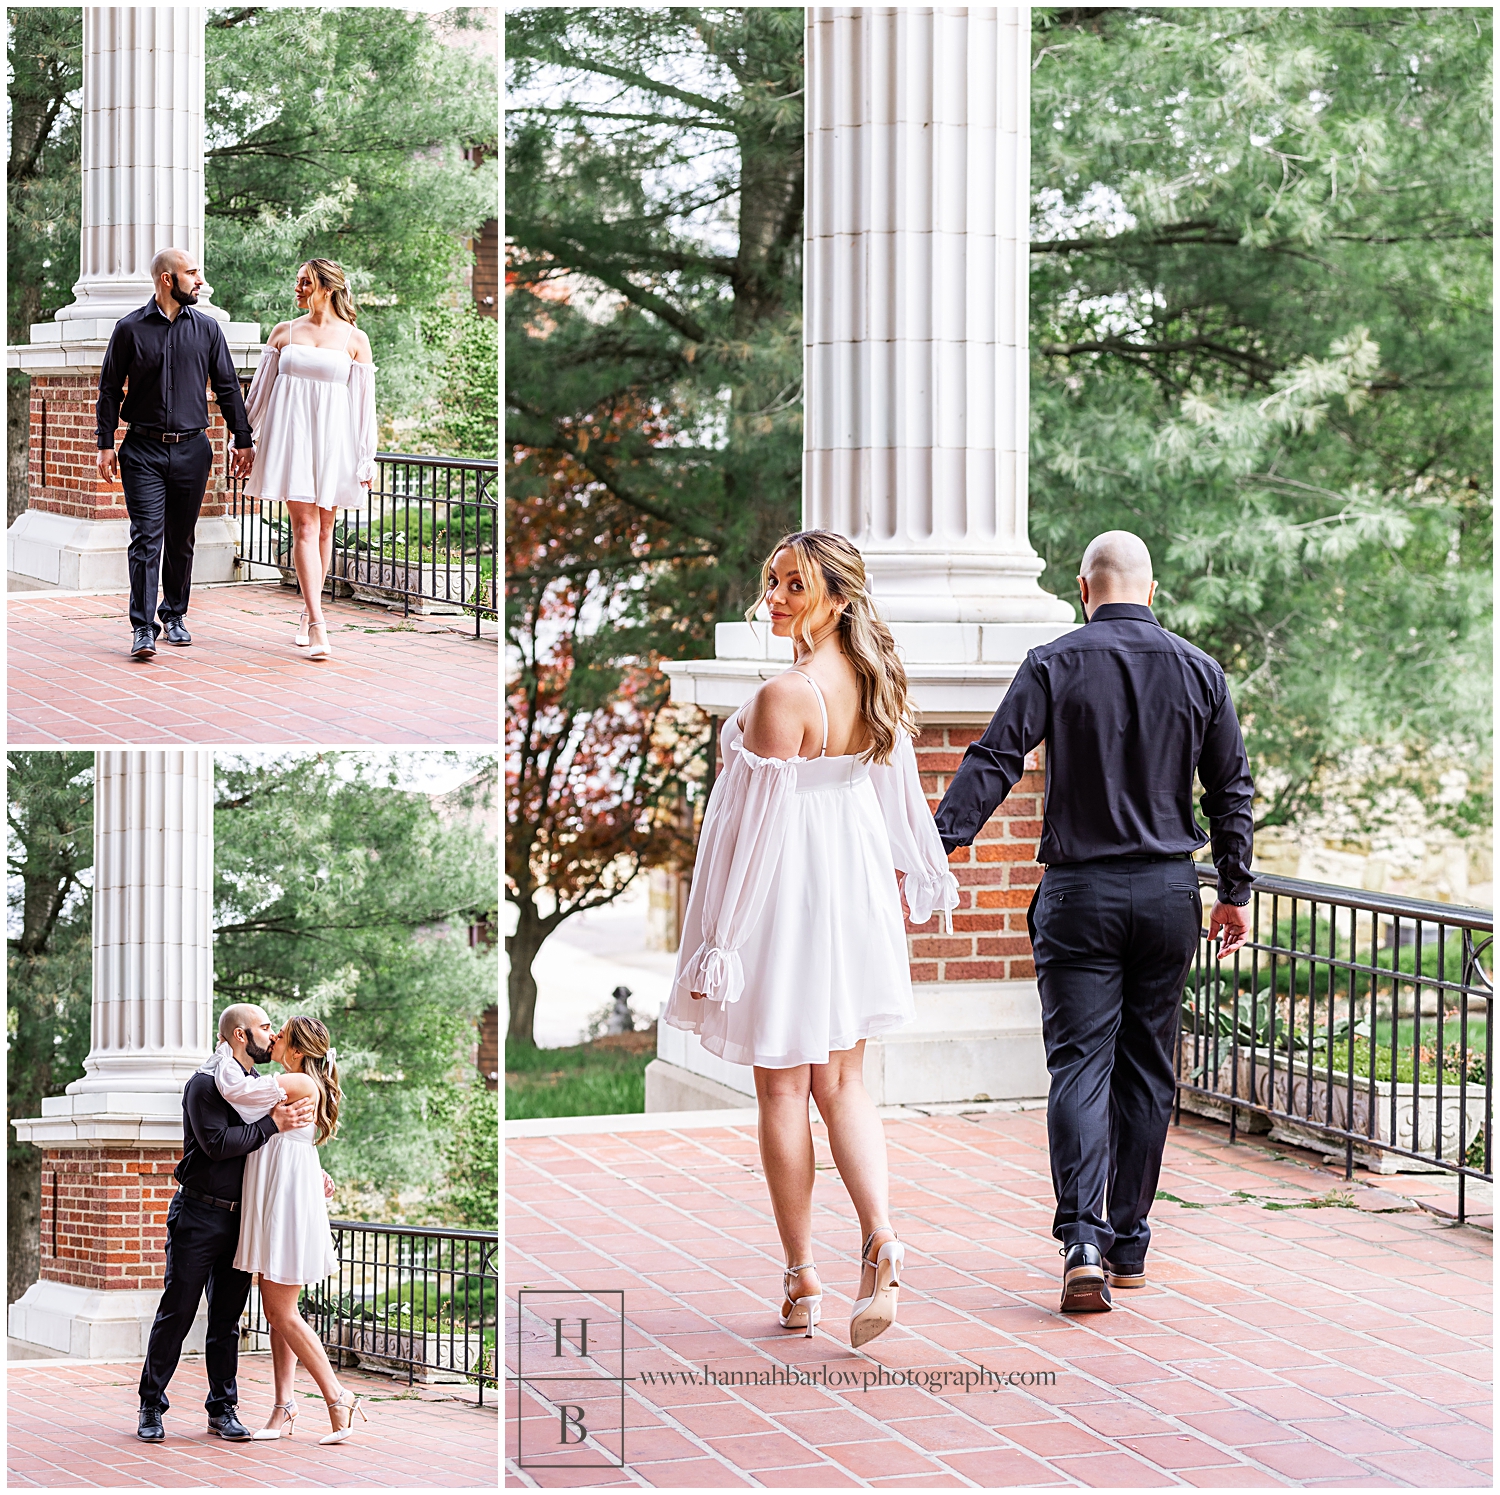 Couple walks and kisses for engagement photos